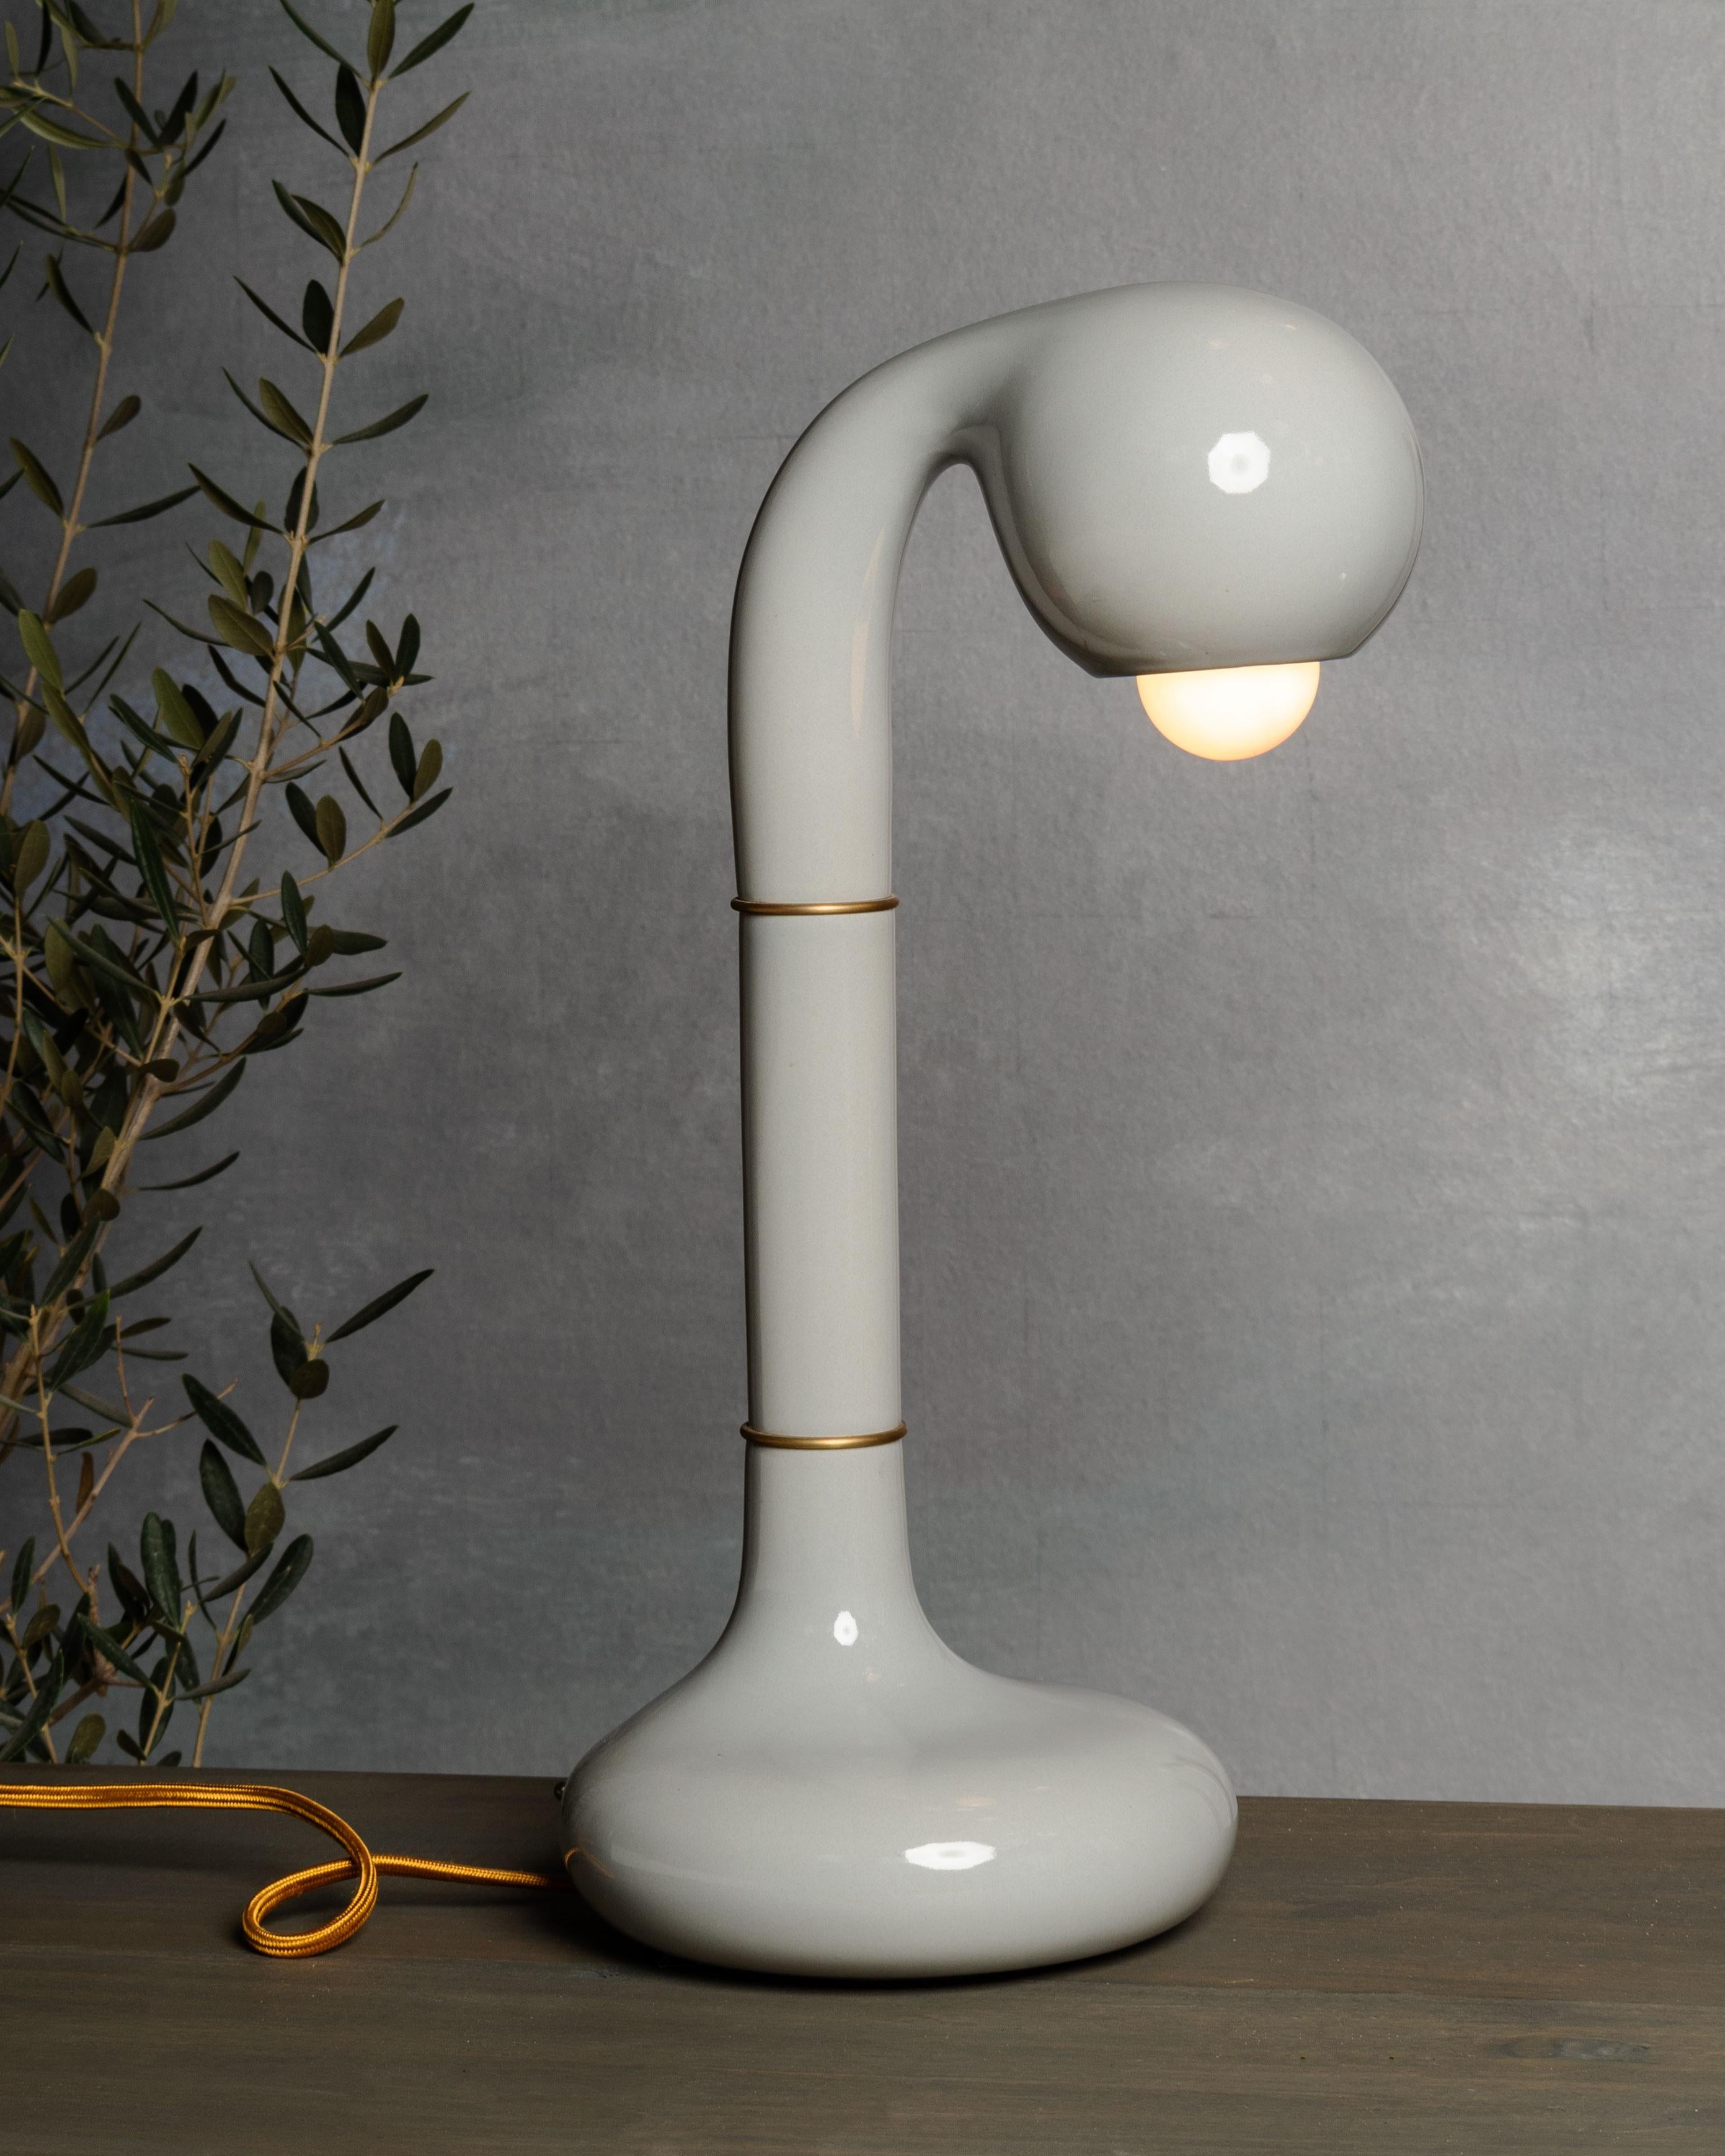 The Entler Floor Lamp. Cast in ceramic stoneware, then carefully glazed and fired in any of our twenty-five signature finishes. The modular design allows for endless customization and versatility - a perfect fit for any space. These playful